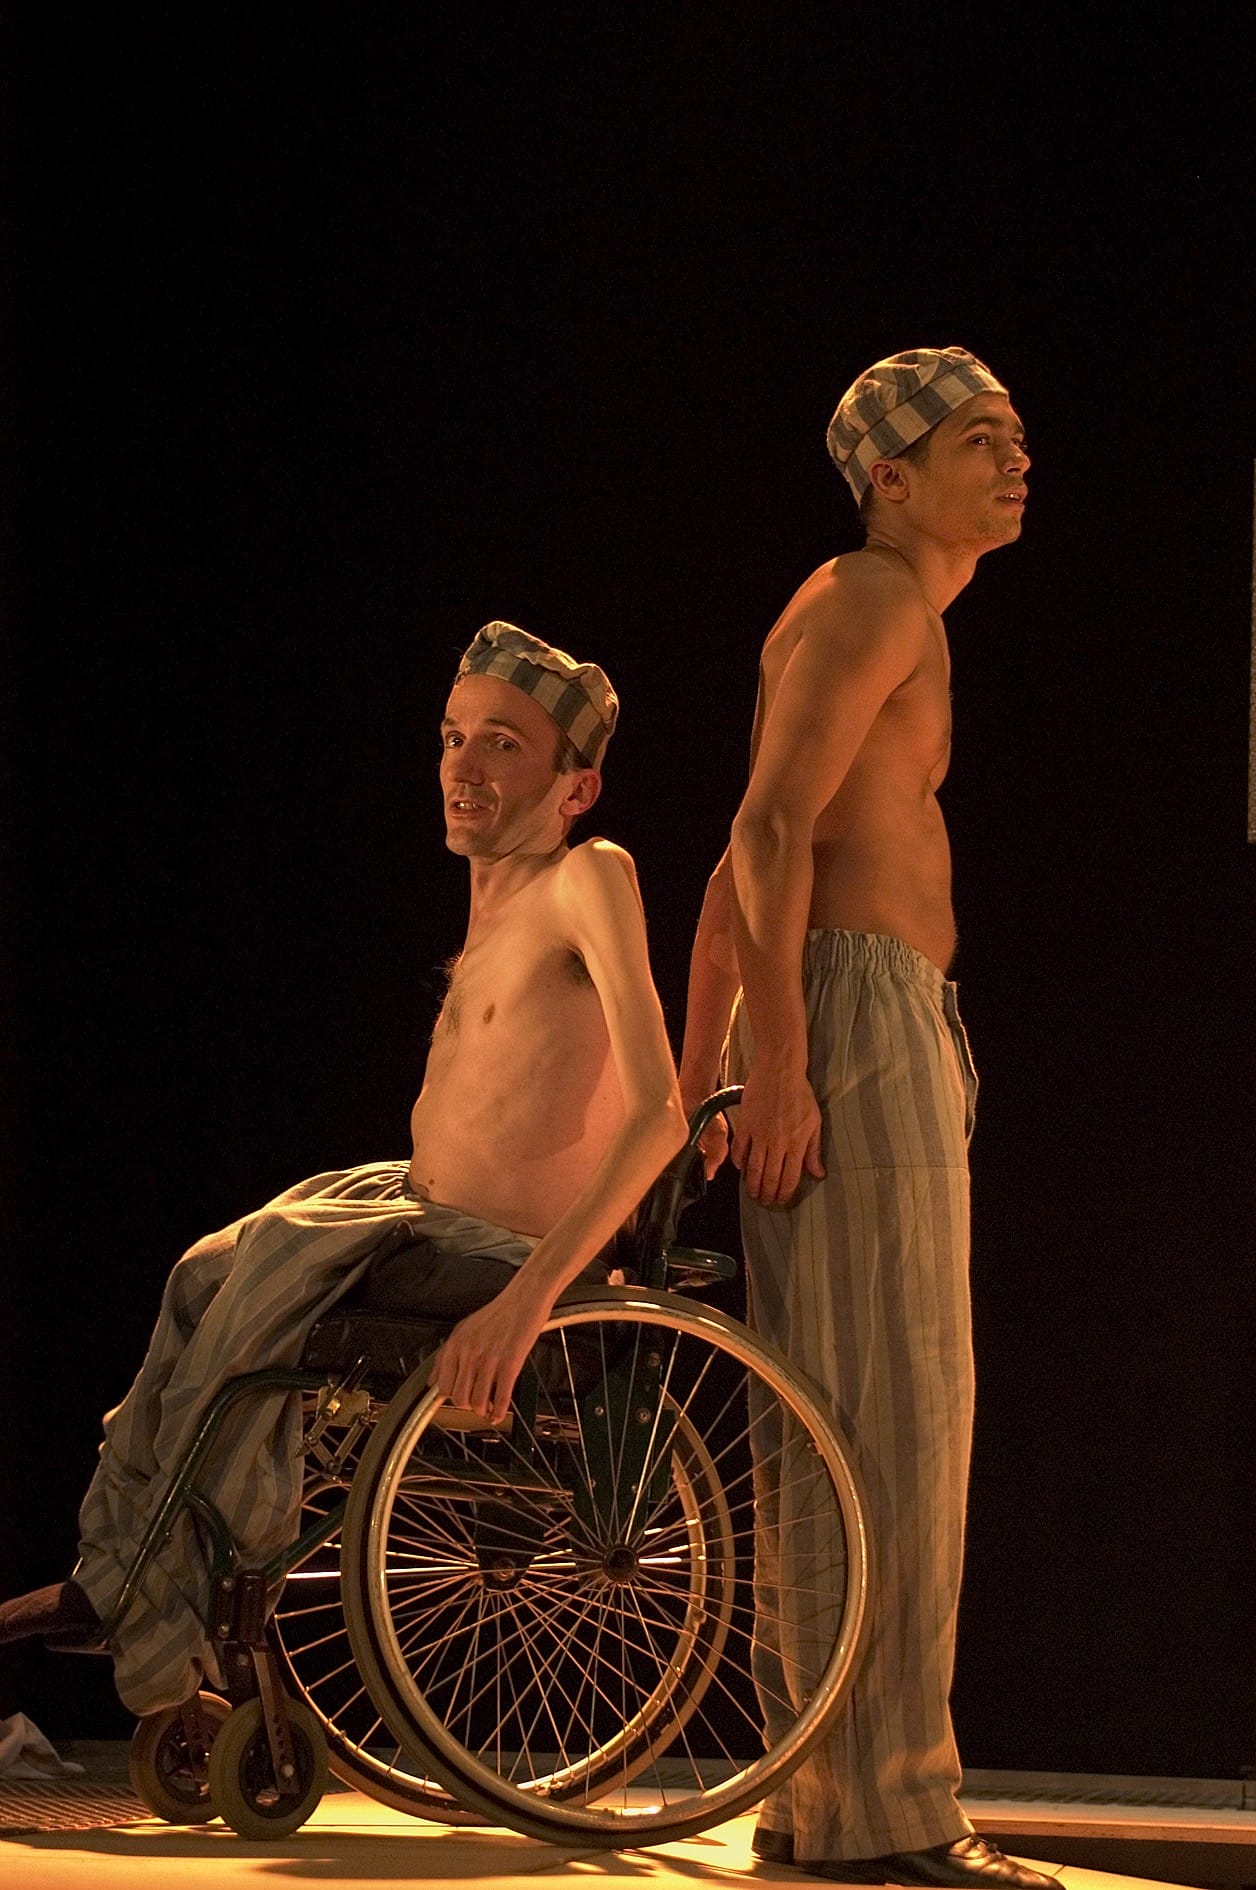 Two performers are positioned back to back, one is in a wheelchair and the other stood upright. They wear the uniform of a person in a concentration camp.